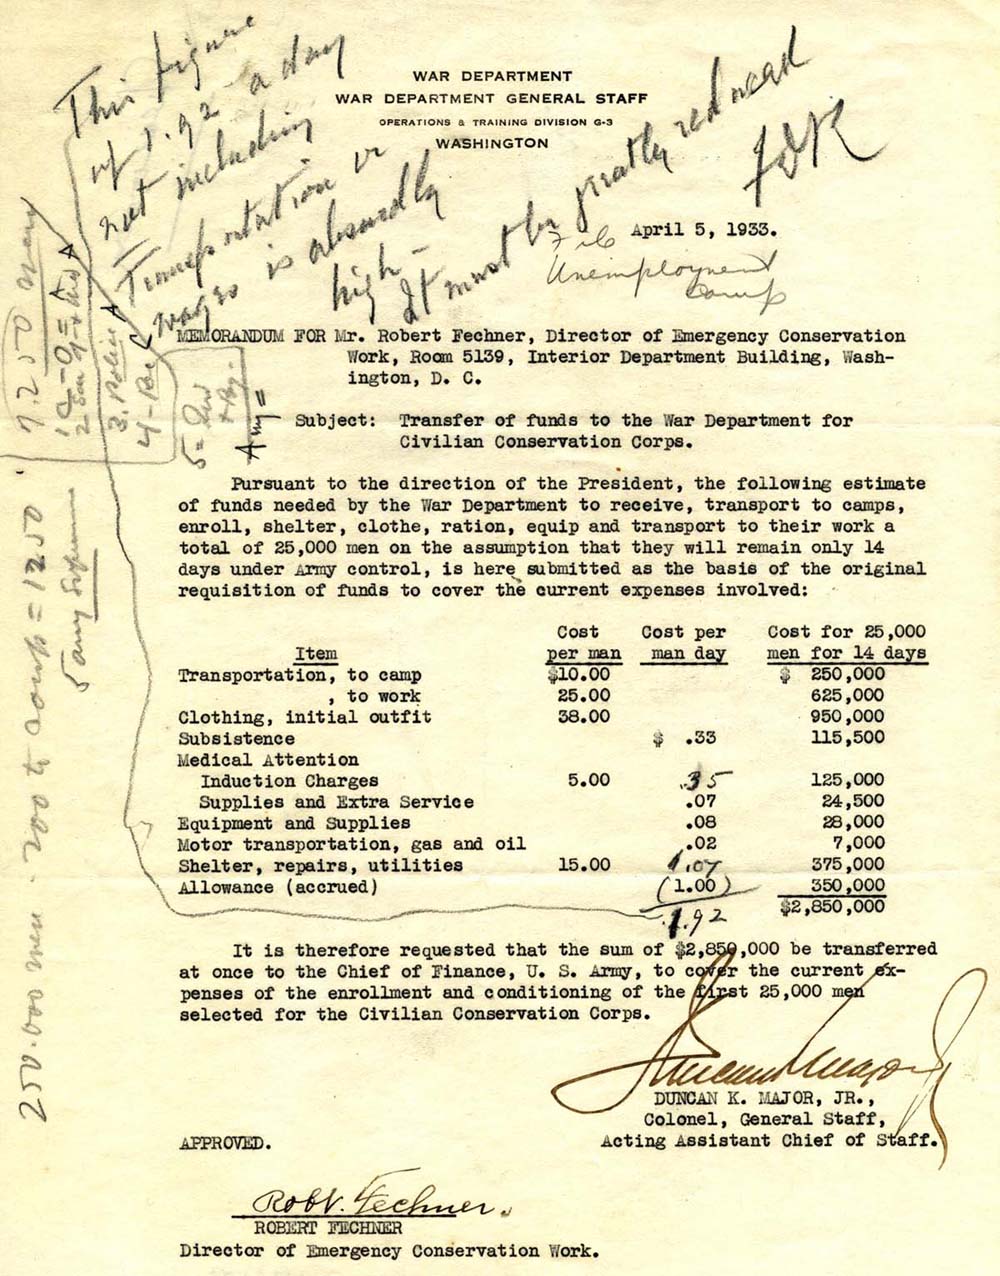 memo from Col. Duncan Major of the Army to Fechner estimates the costs to enroll and maintain 25,000 camp enrollees for 14 days